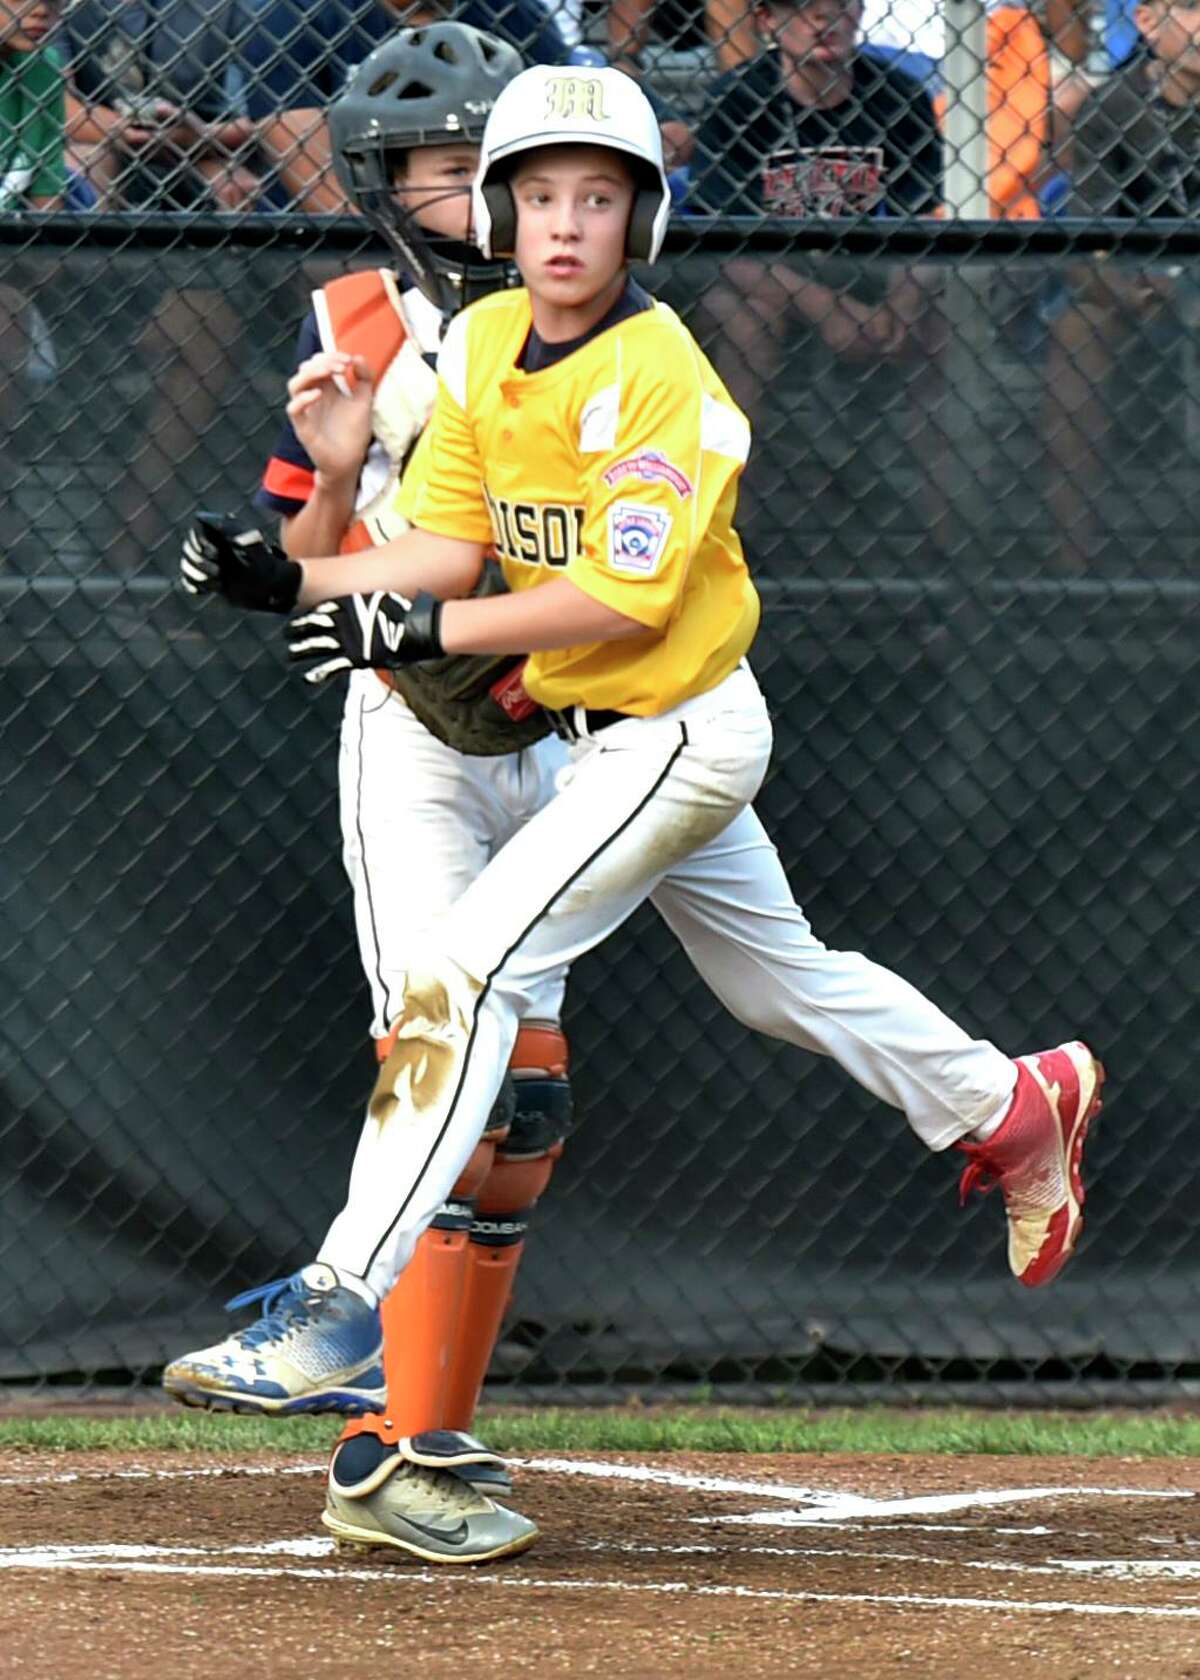 Connecticut’s Christian Kells scores in the first inning against Massachusetts during the Little League Eastern Regional on Tuesday.